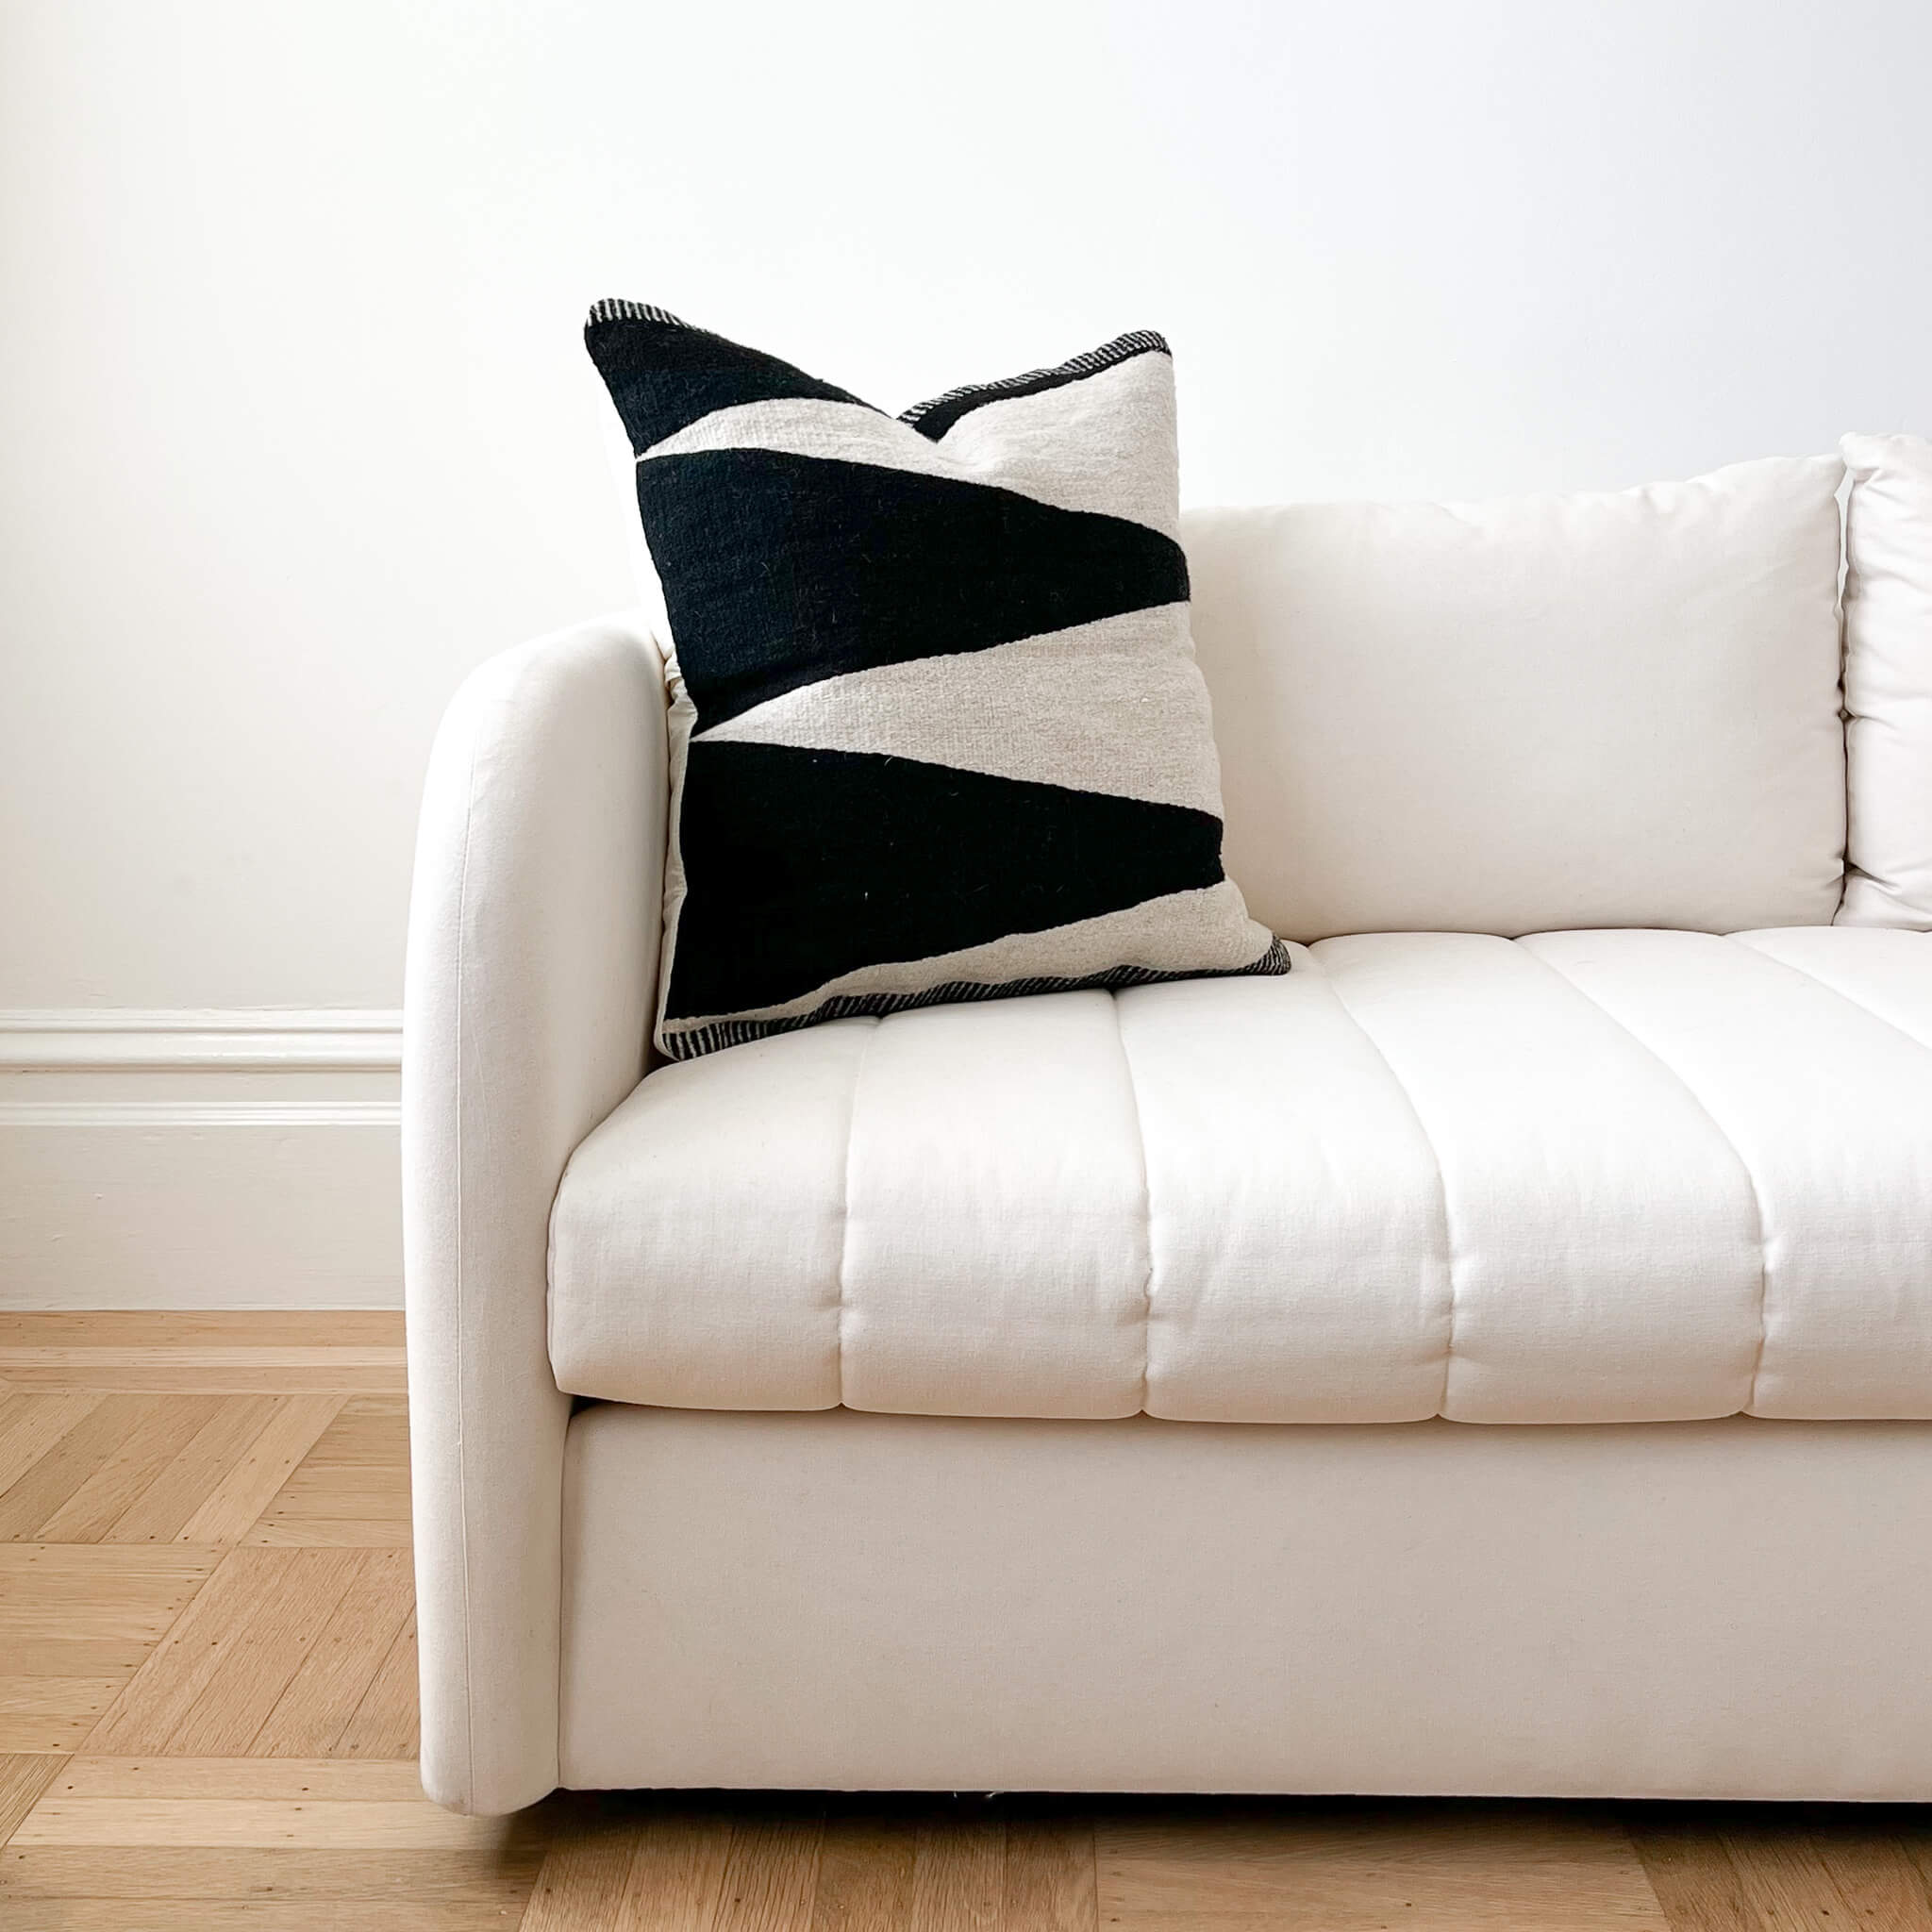 Hidalgo black and ivory throw pillow made in Mexico on an ivory couch.